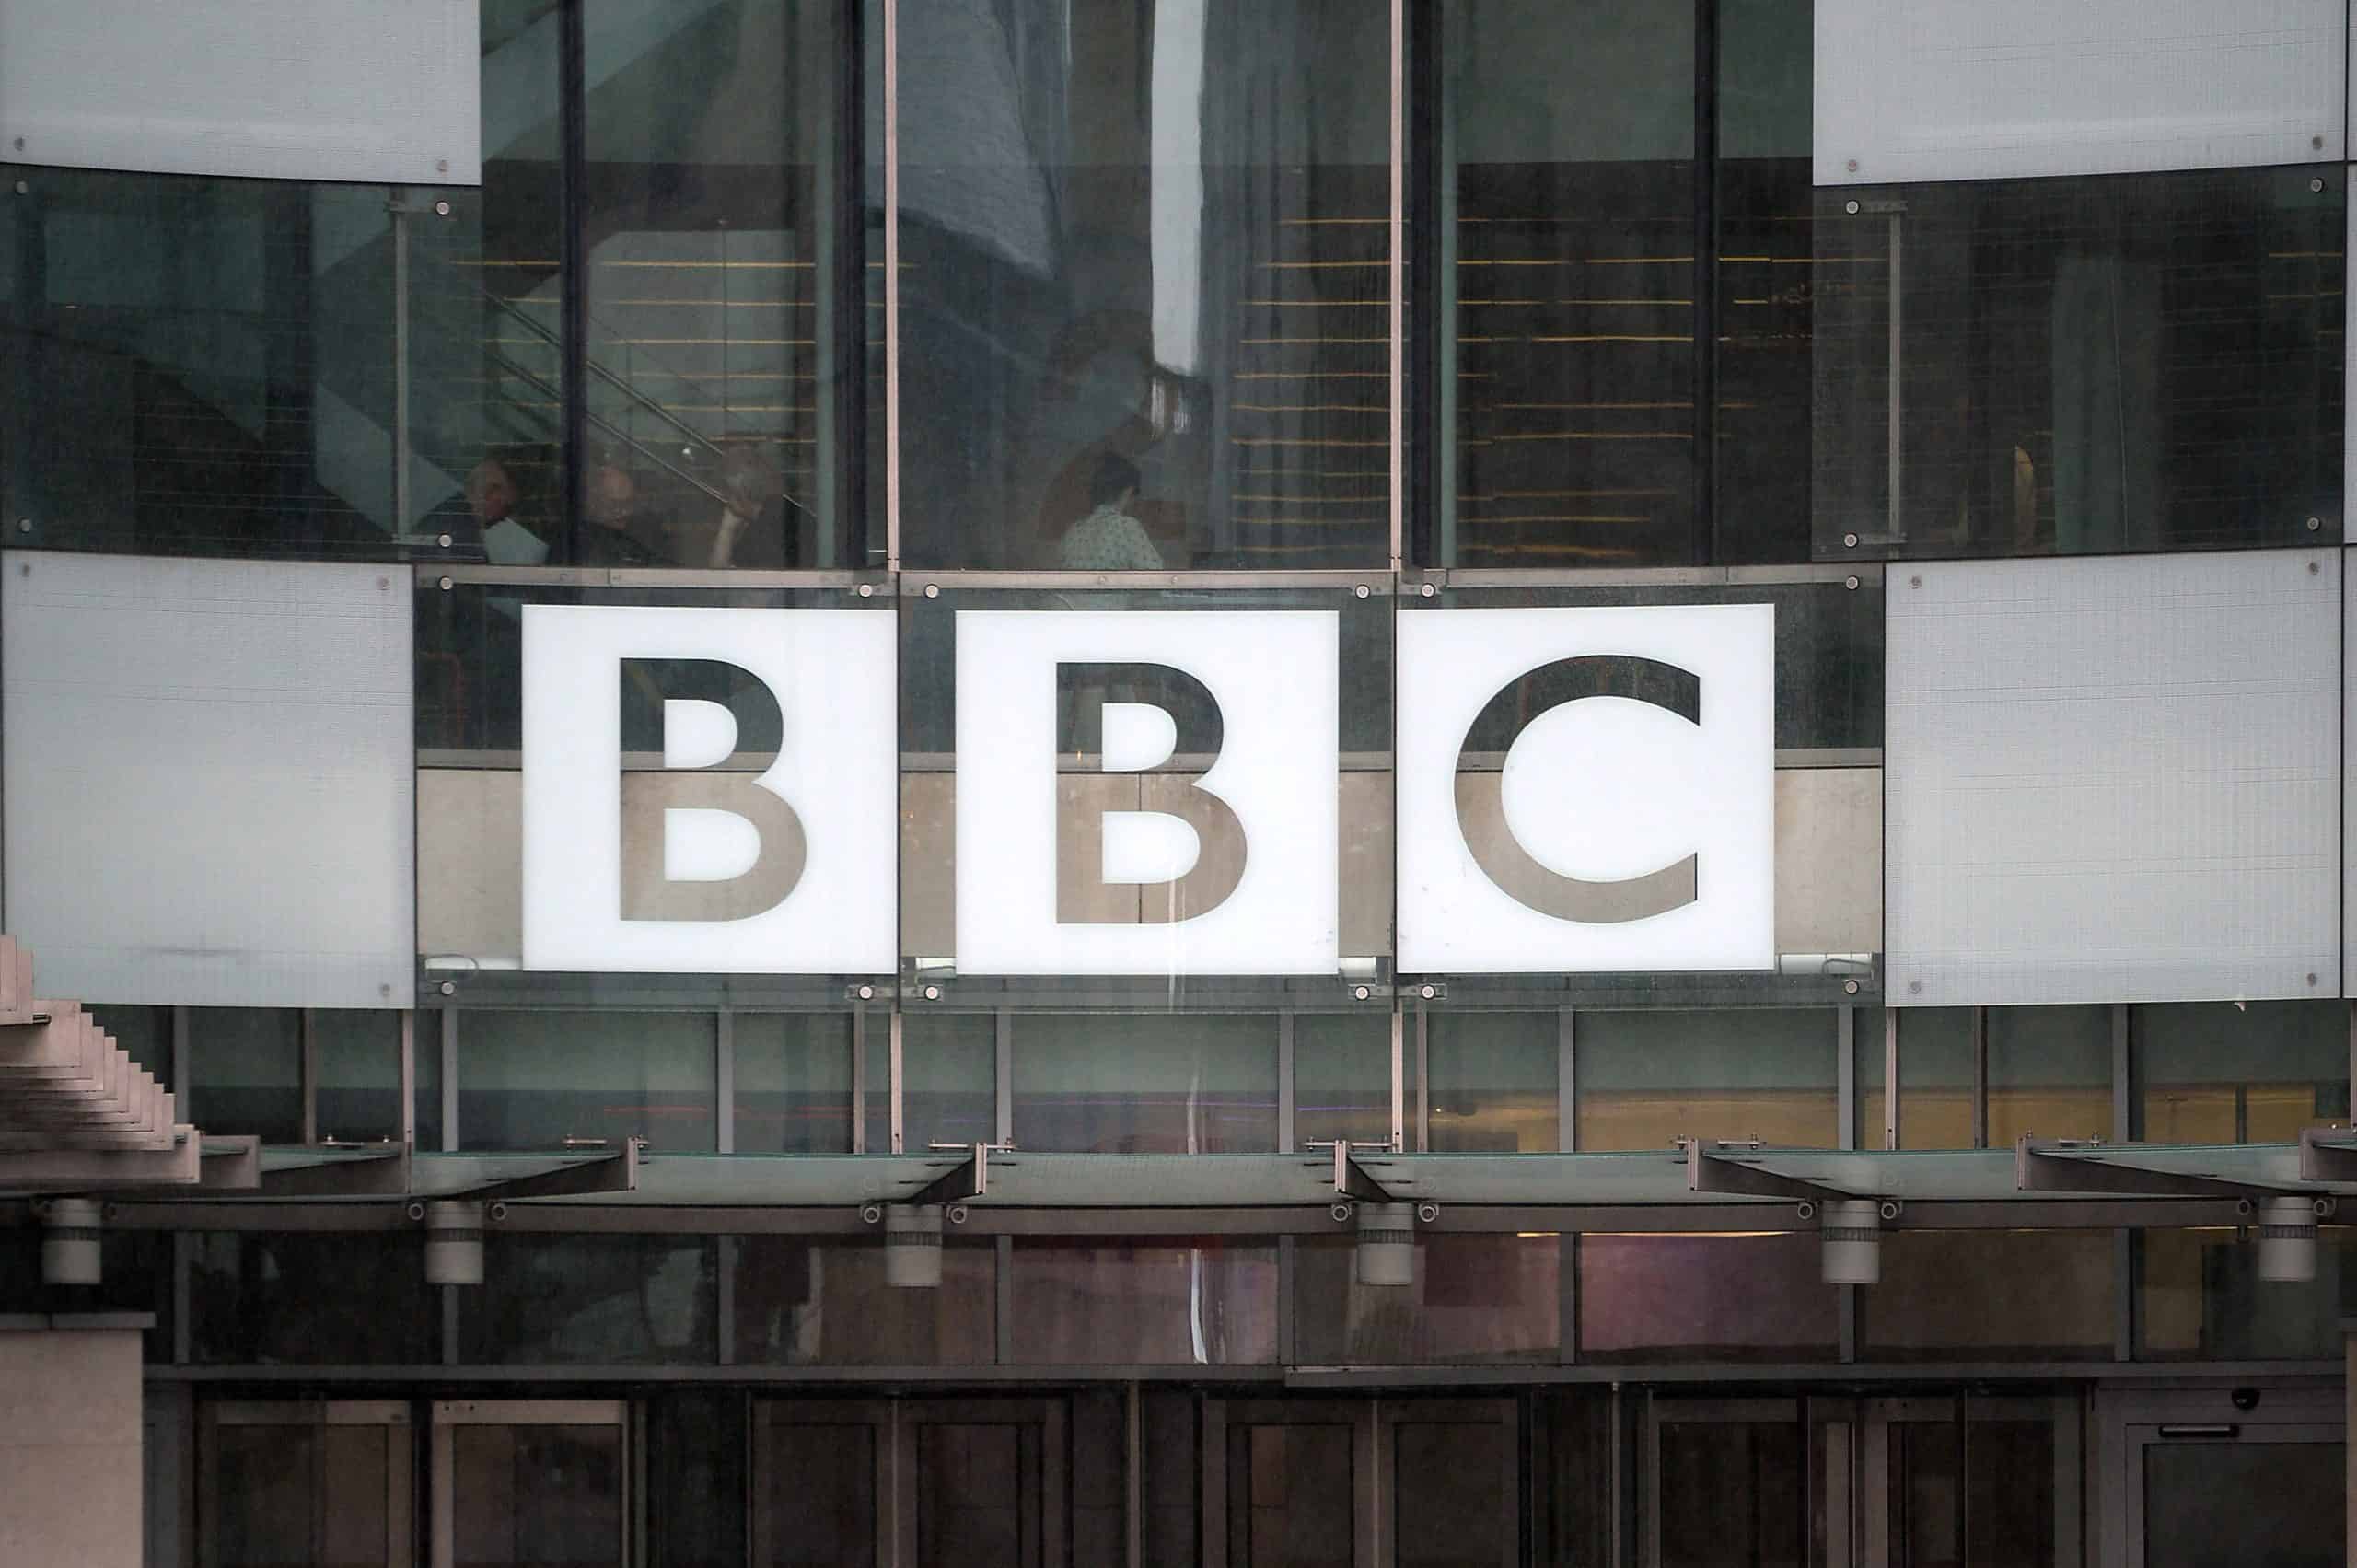 BBC to make ‘sweeping changes’ to ‘raise standards’ and ‘challenge bias’